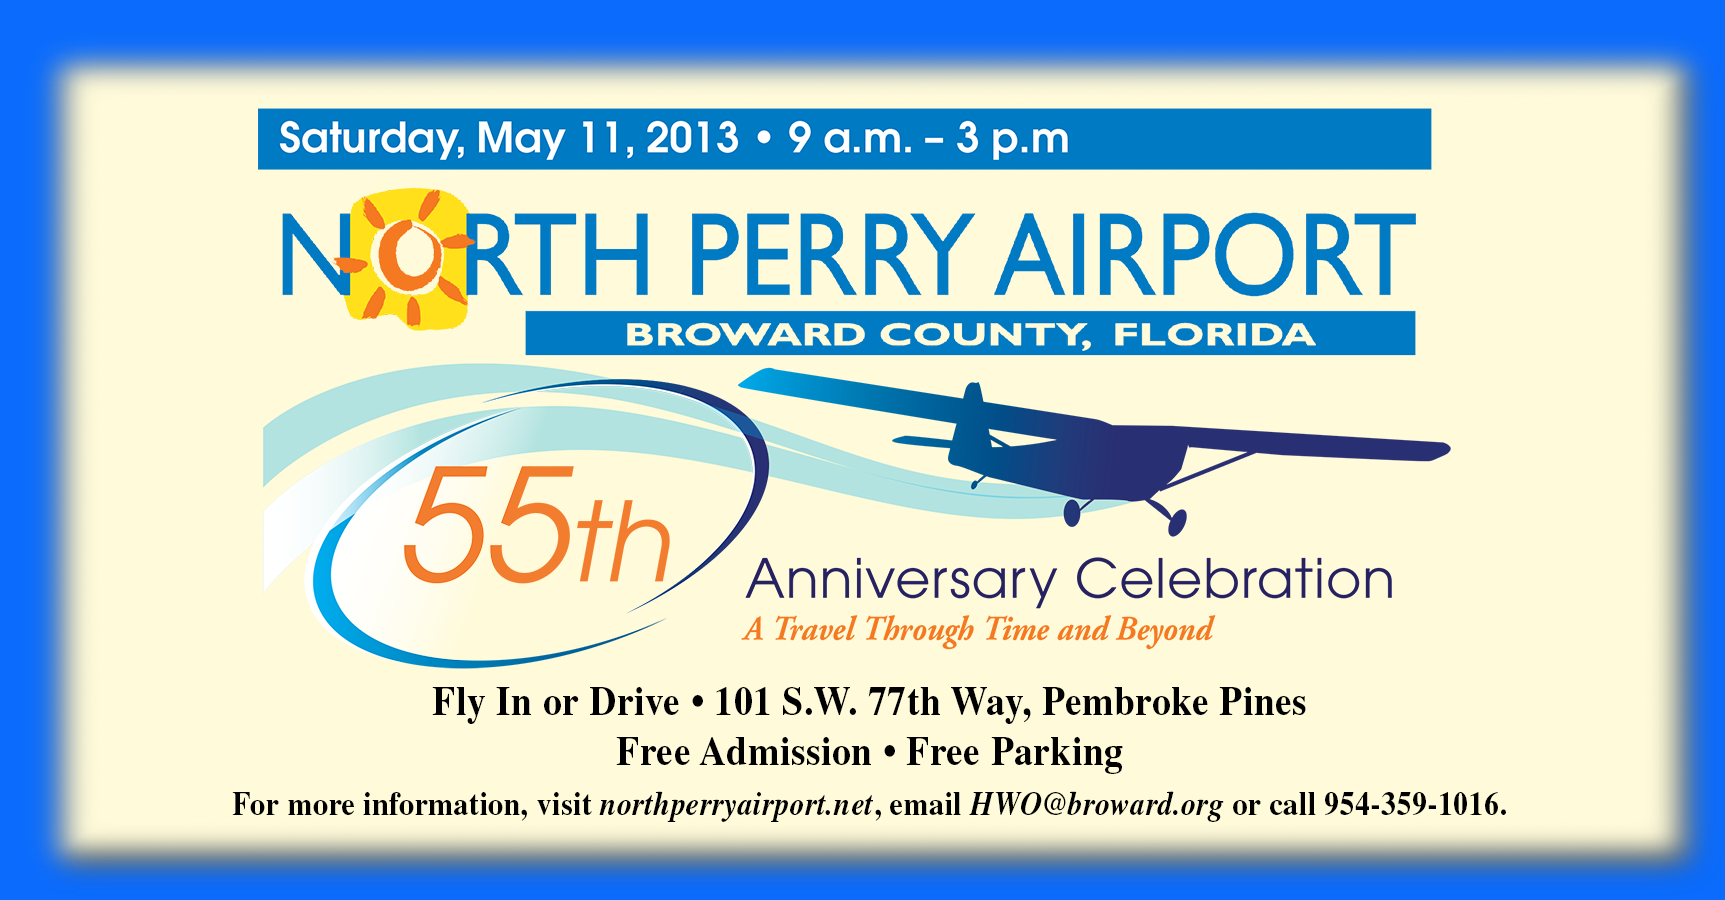 North Perry Airport 55th Anniversary Celebration